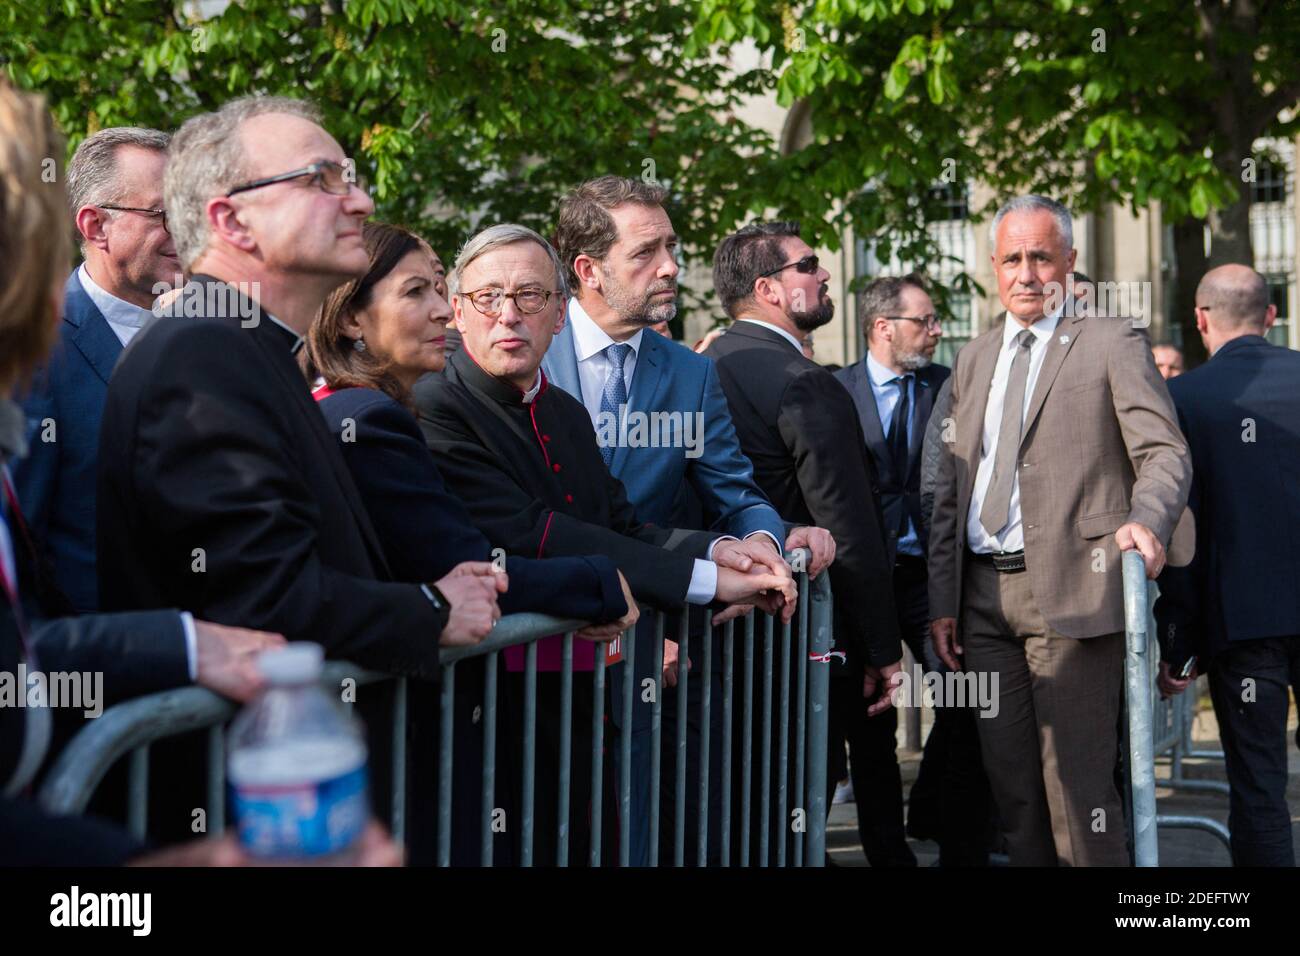 Jean-Claude Gallet General of the fire fighters of paris, Jean-Marc Chauve, French Interior Minister Christophe Castaner, Paris prefect Didier Lallement, Paris mayor Anne Hidalgo, and other officials walk by Notre Dame cathedral on April 18, 2019 in Paris. France paid a daylong tribute on April 18, 2019 to the Paris firefighters who saved Notre Dame Cathedral from collapse, while construction workers rushed to secure an area above one of the church's famed rose-shaped windows and other vulnerable sections of the fire-damaged landmark. Photo by Raphael Lafargue/ABACAPRESS.COM Stock Photo